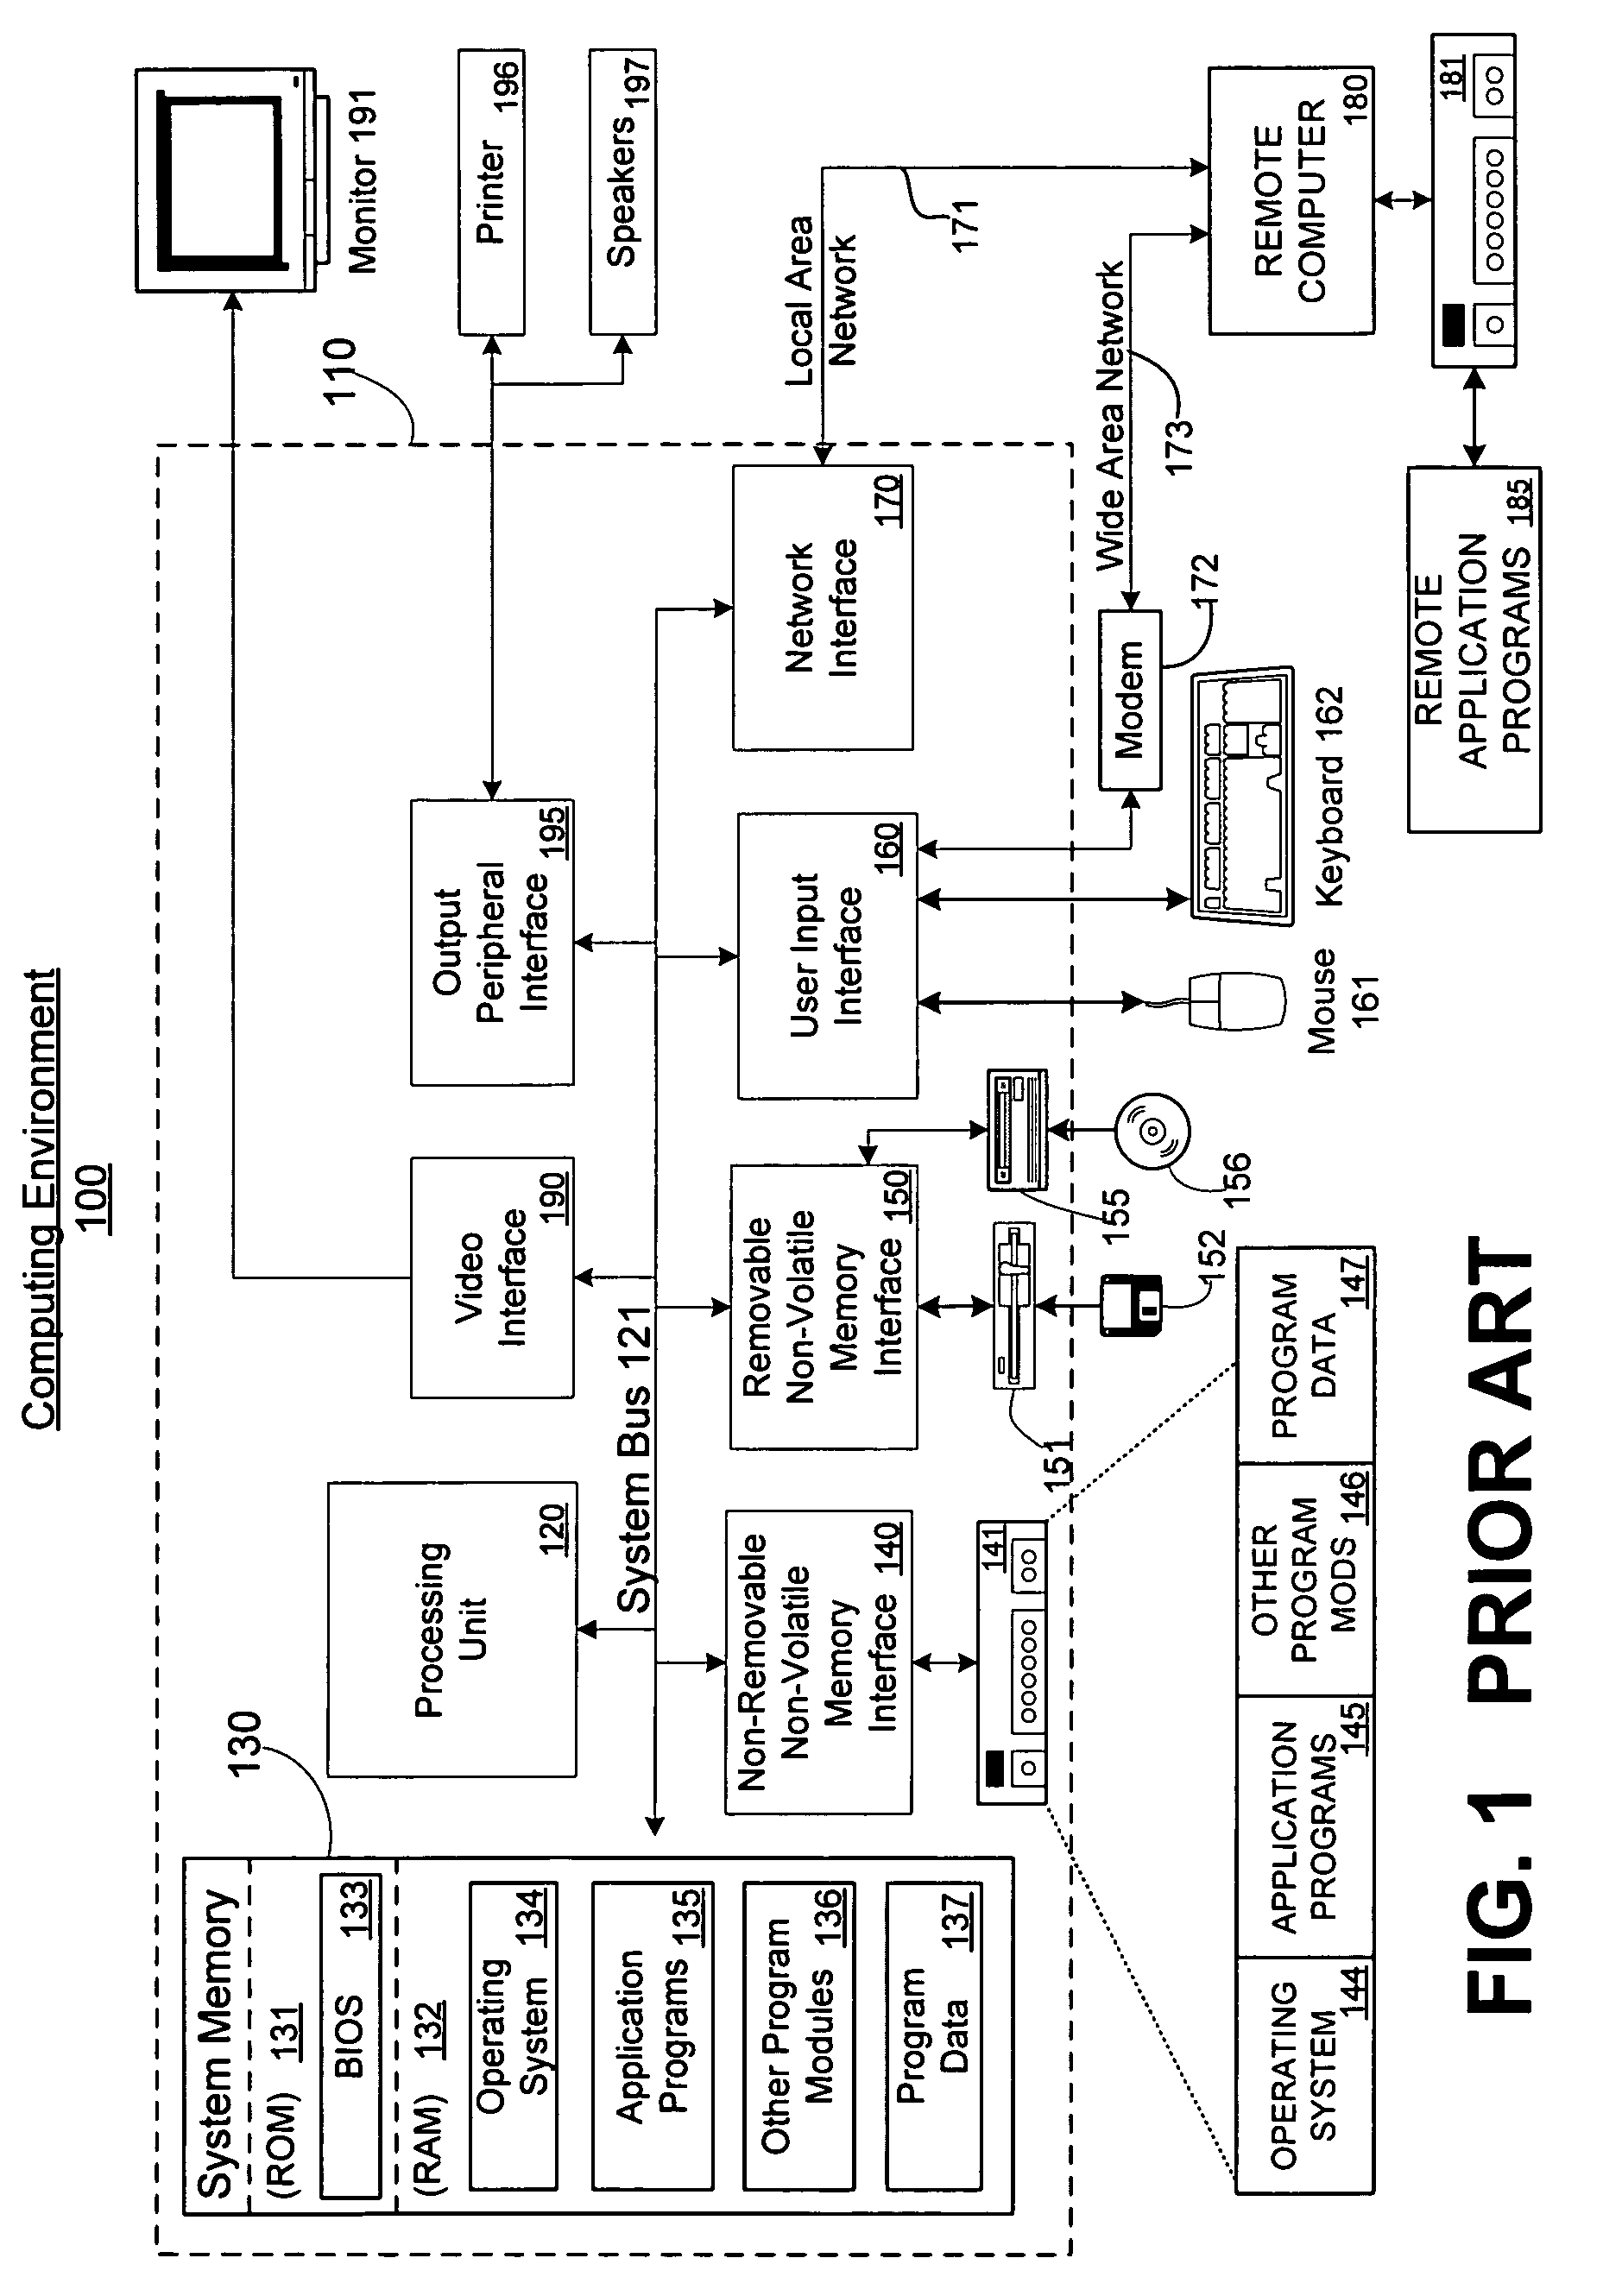 Task-oriented processing as an auxiliary to primary computing environments